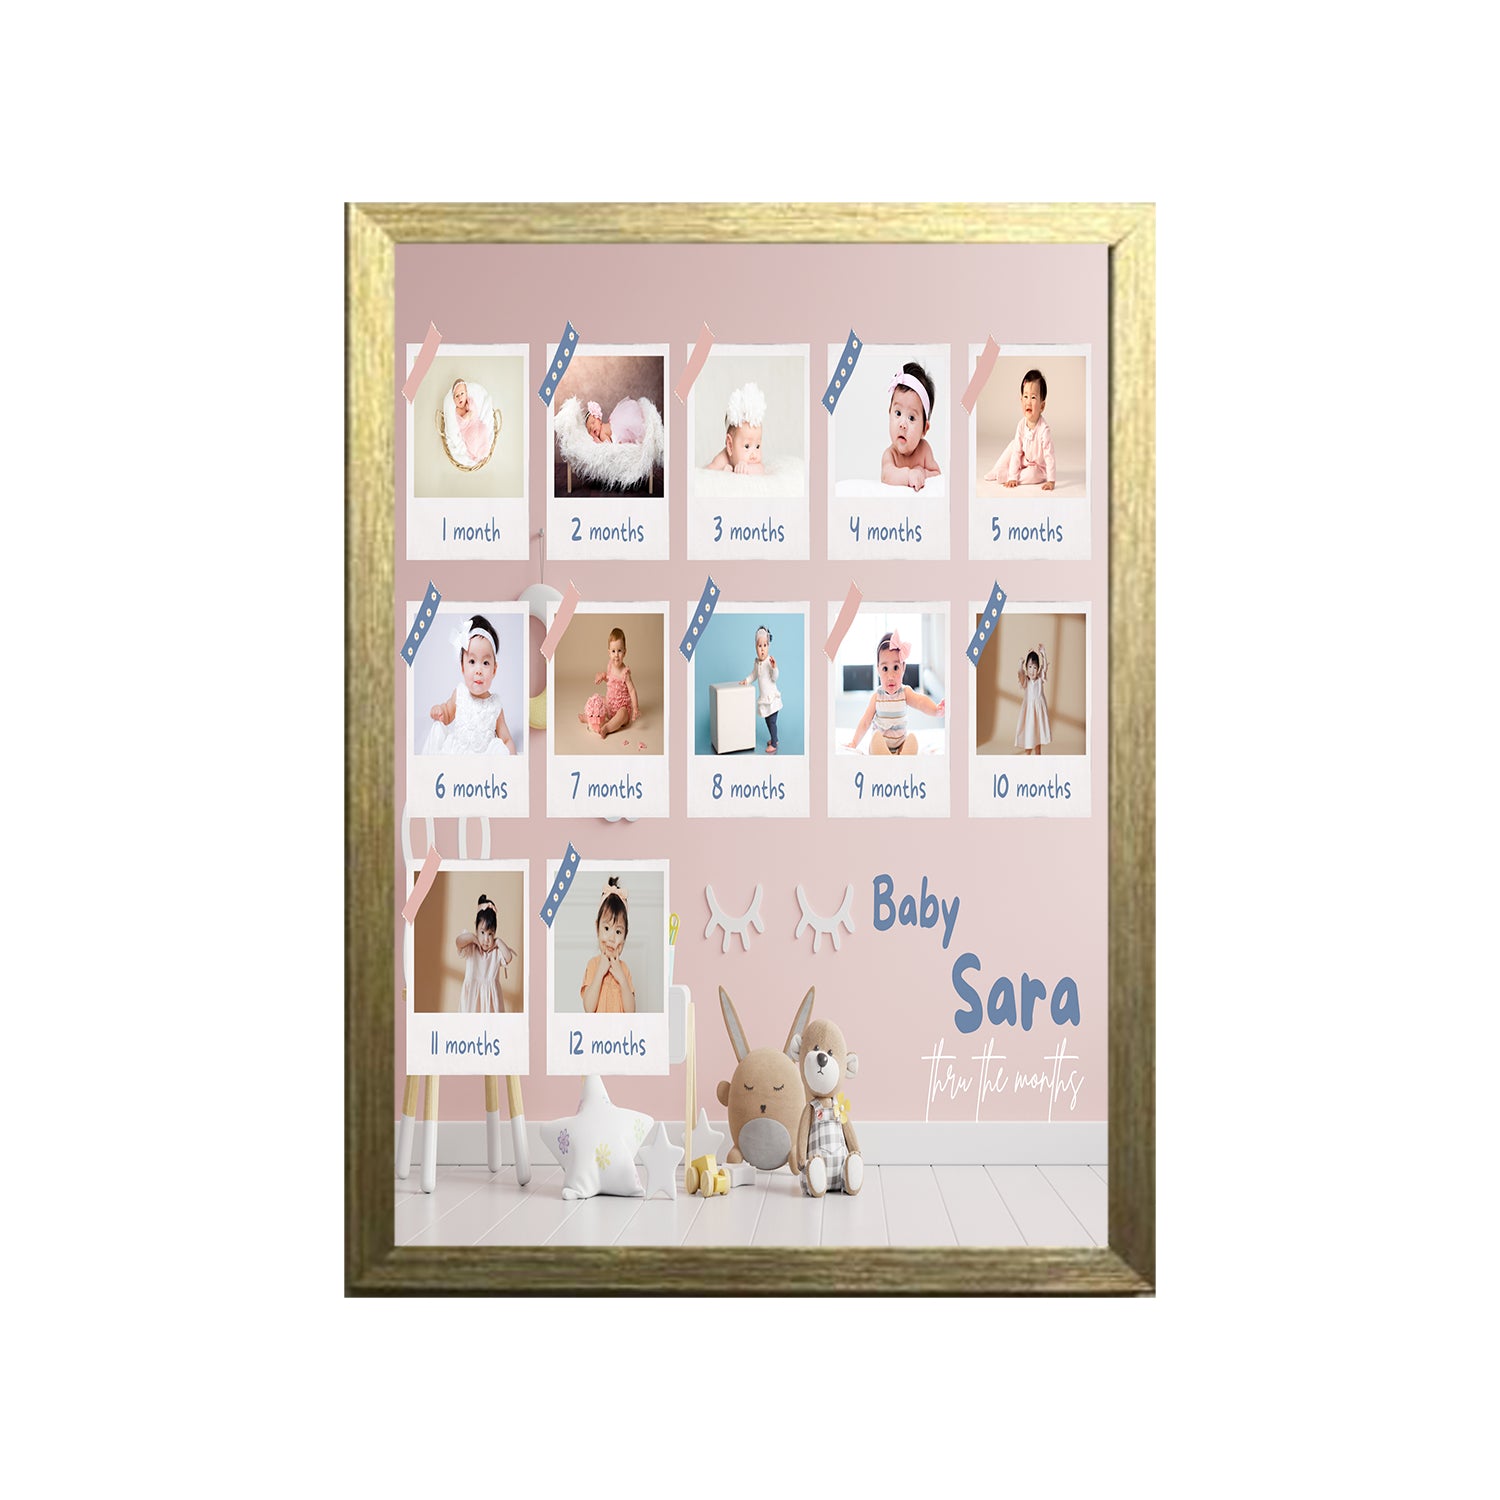 Baby Calender Design Photo Frame 1 Pc ( photo and text is Customizable ) - 0